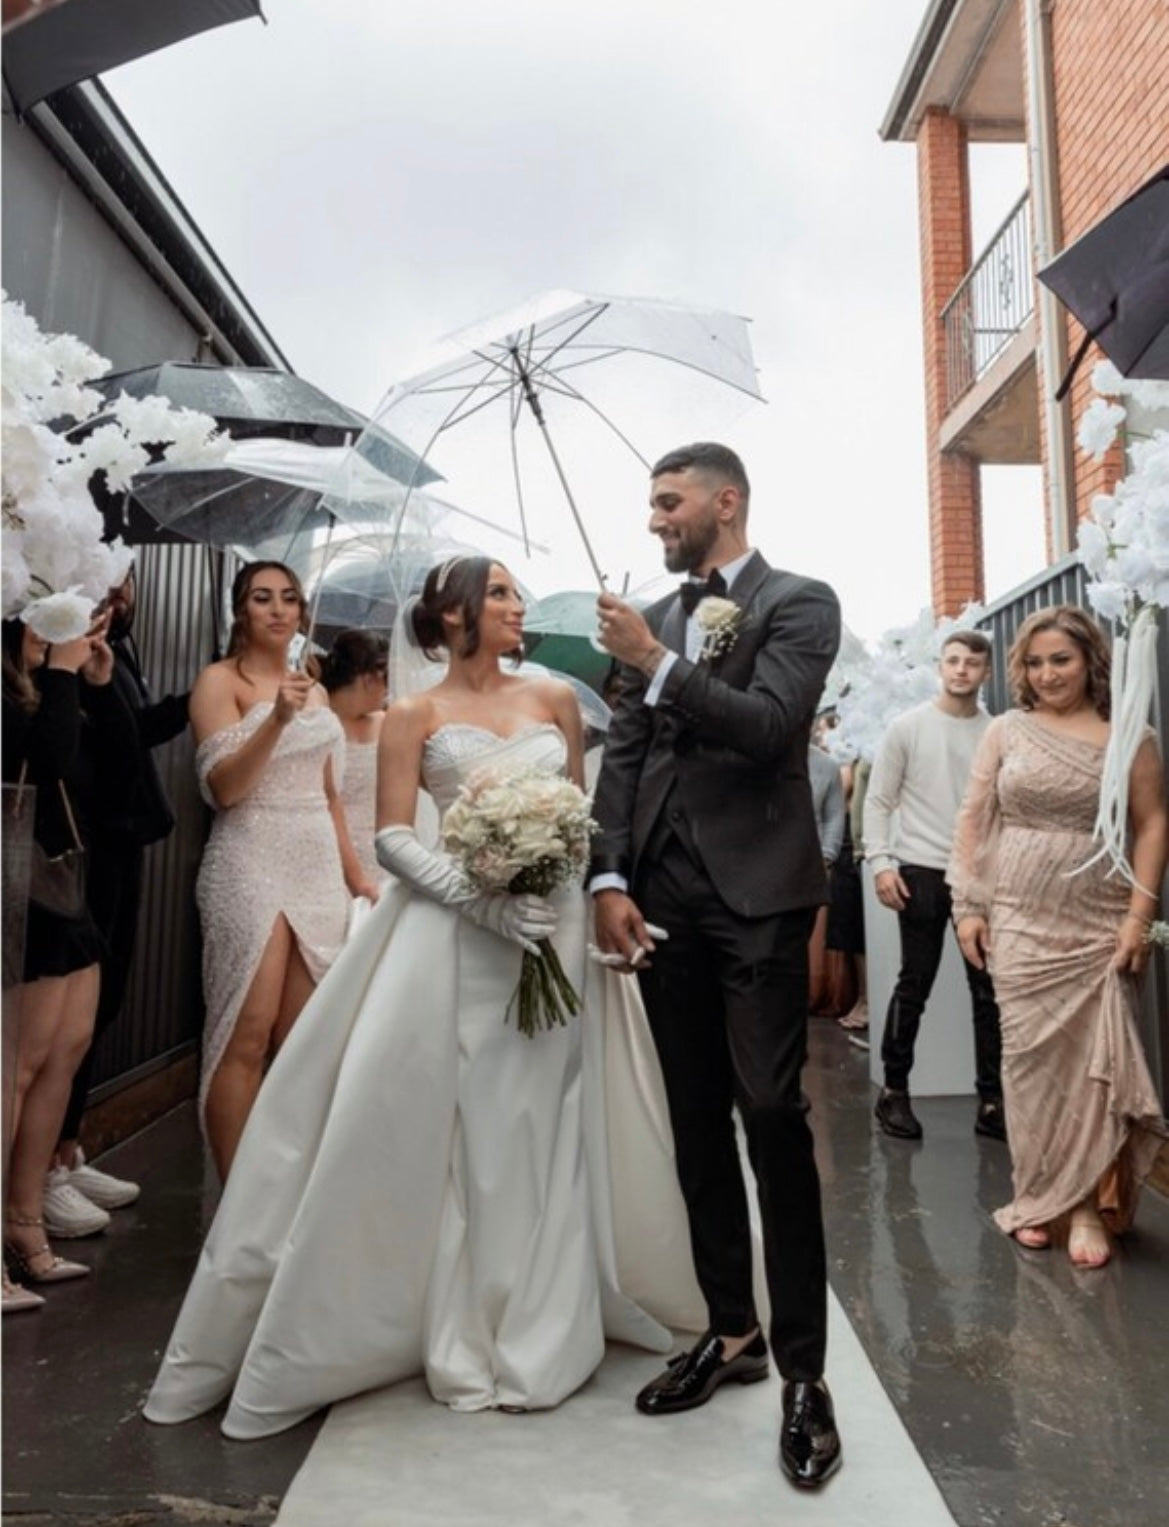 Couple holding hands under clear umbrella at their wedding